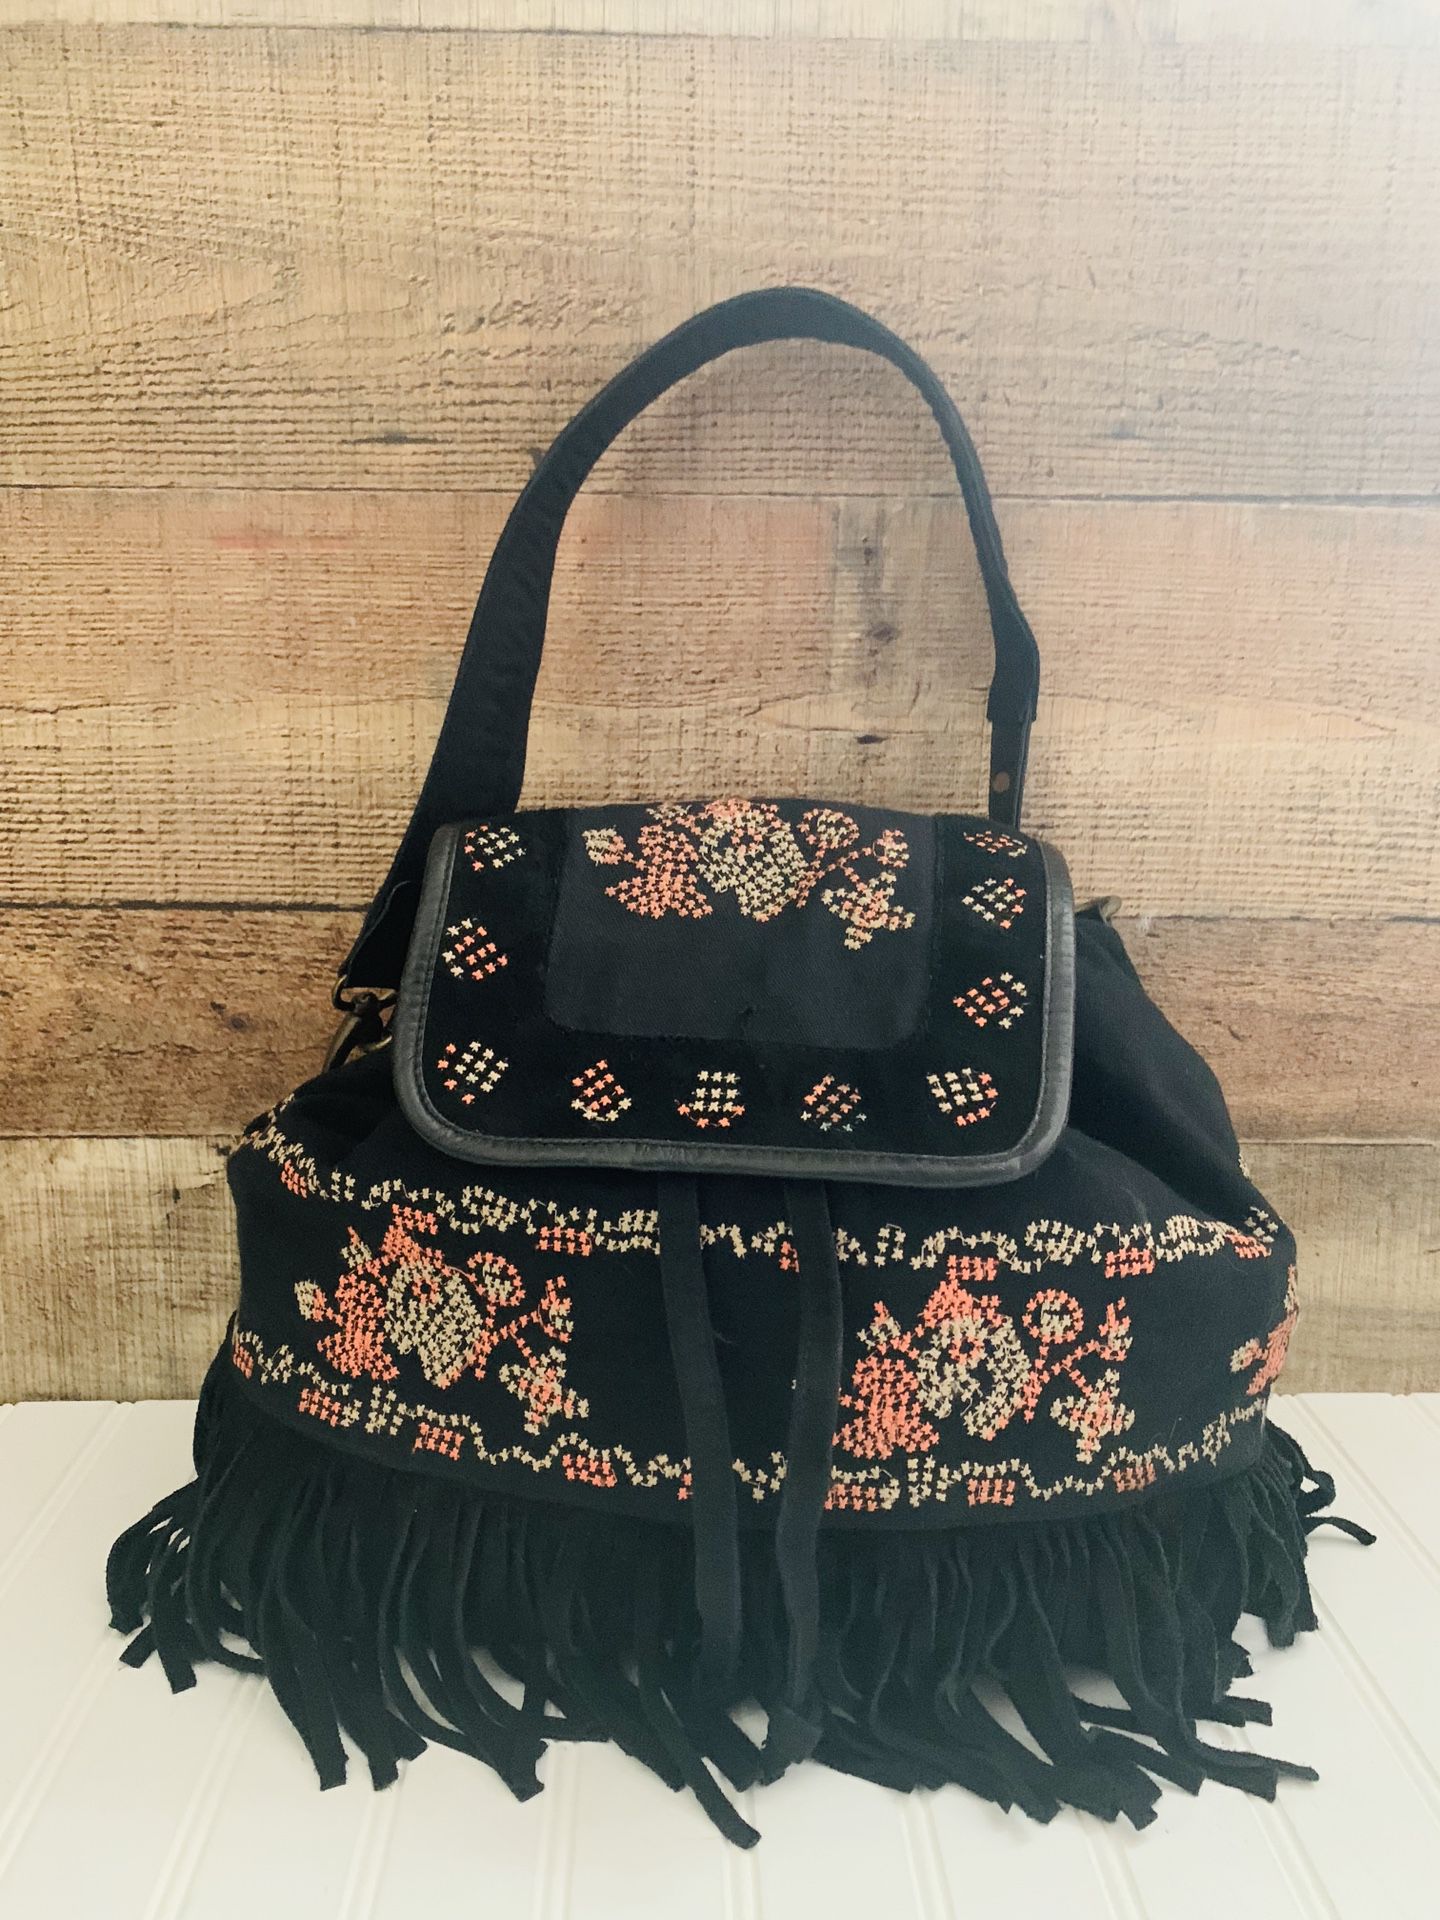 Free People purse/backpack